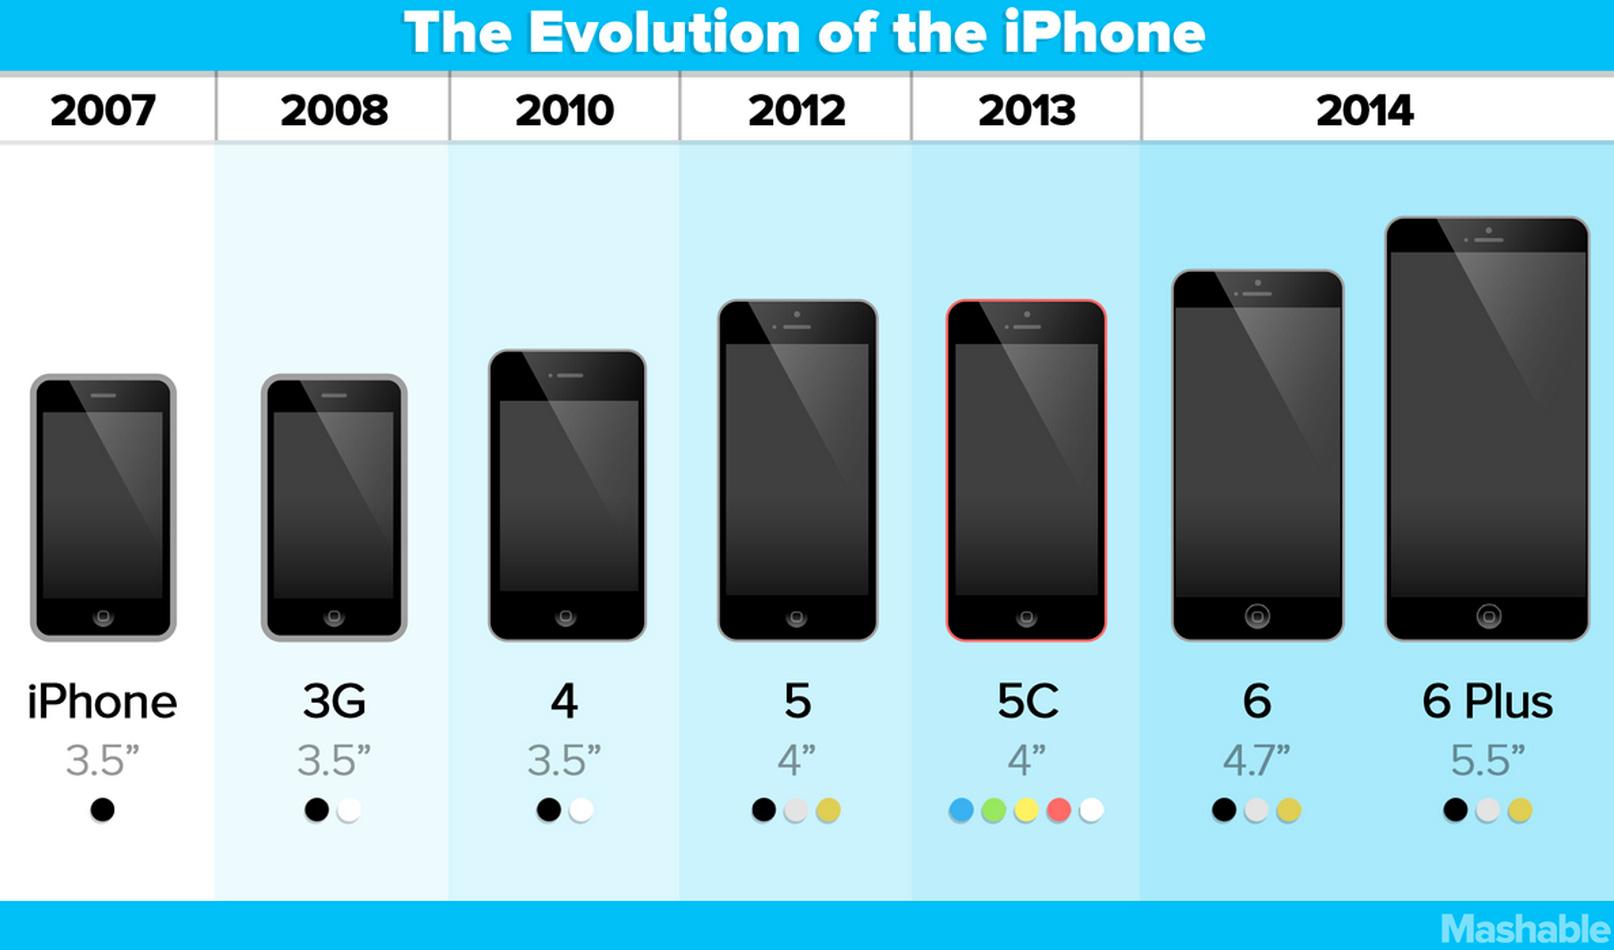 Mashable on Twitter: "The evolution of the iPhone http://t.co